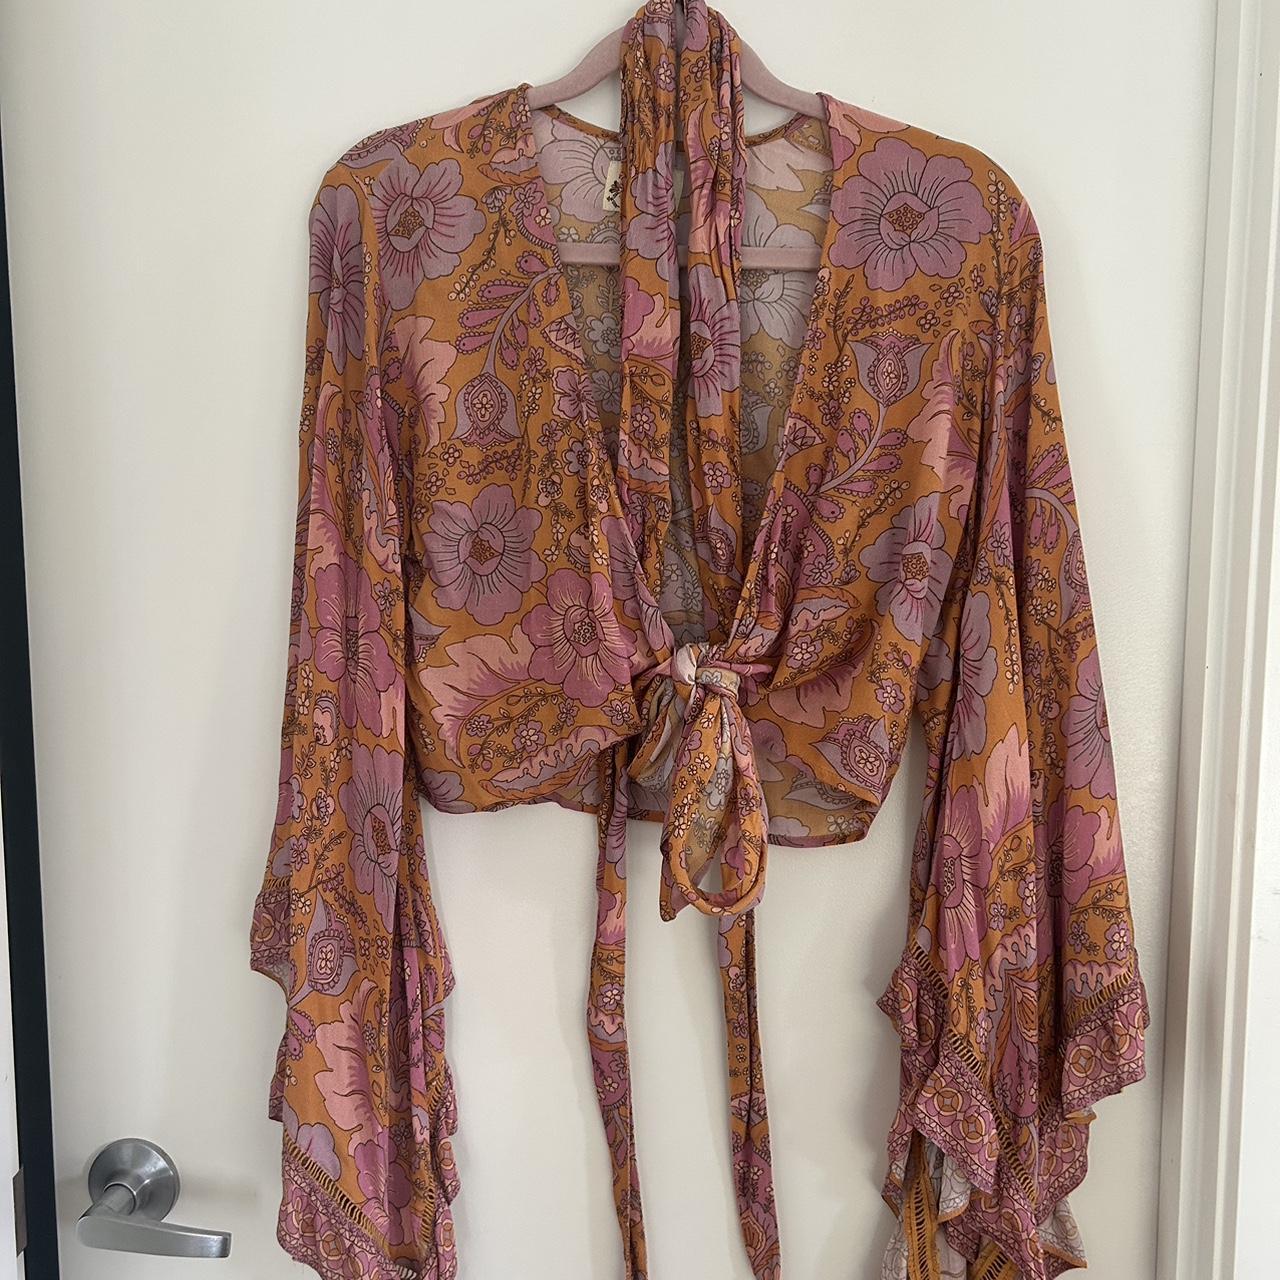 Nine lives bazaar wing top size 8 with matching... - Depop